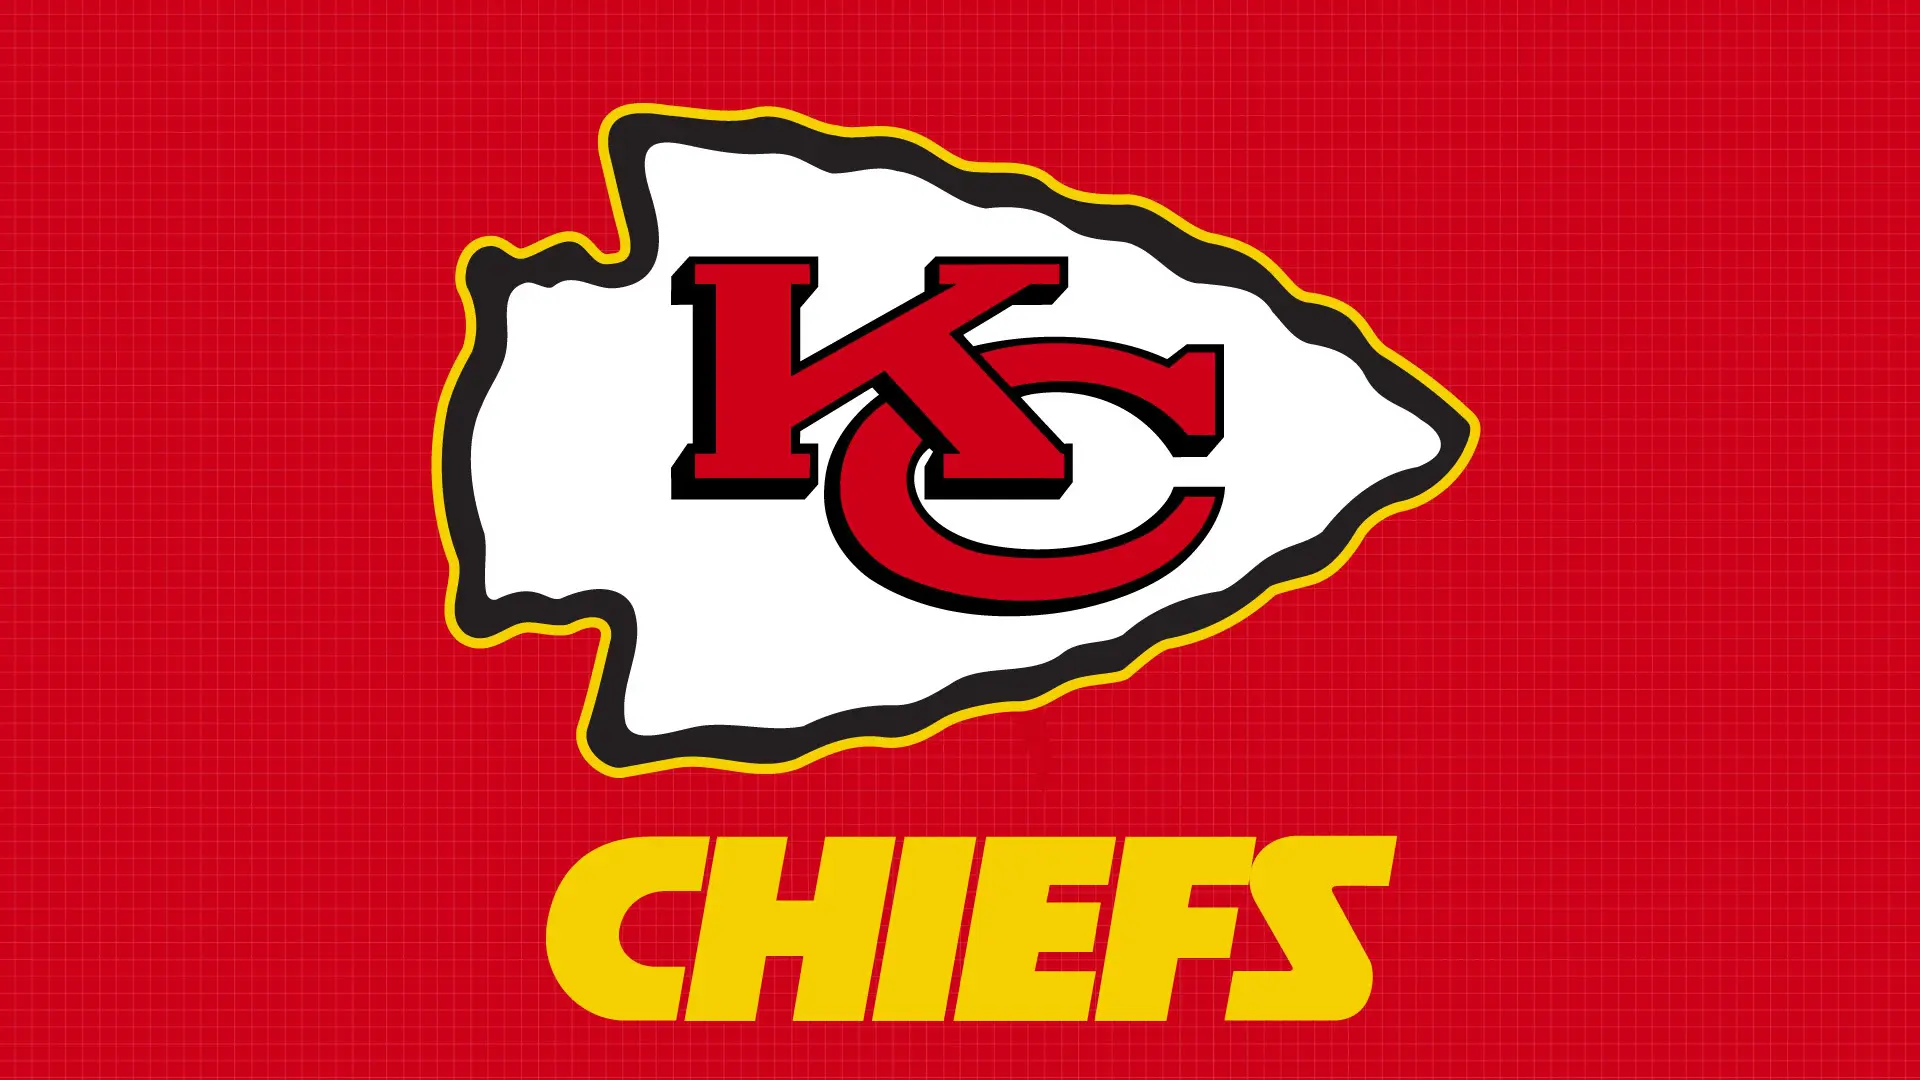 Logo of the kansas city chiefs on a red background featuring the letters "kc" inside a white arrowhead shape with a yellow "chiefs" text below.